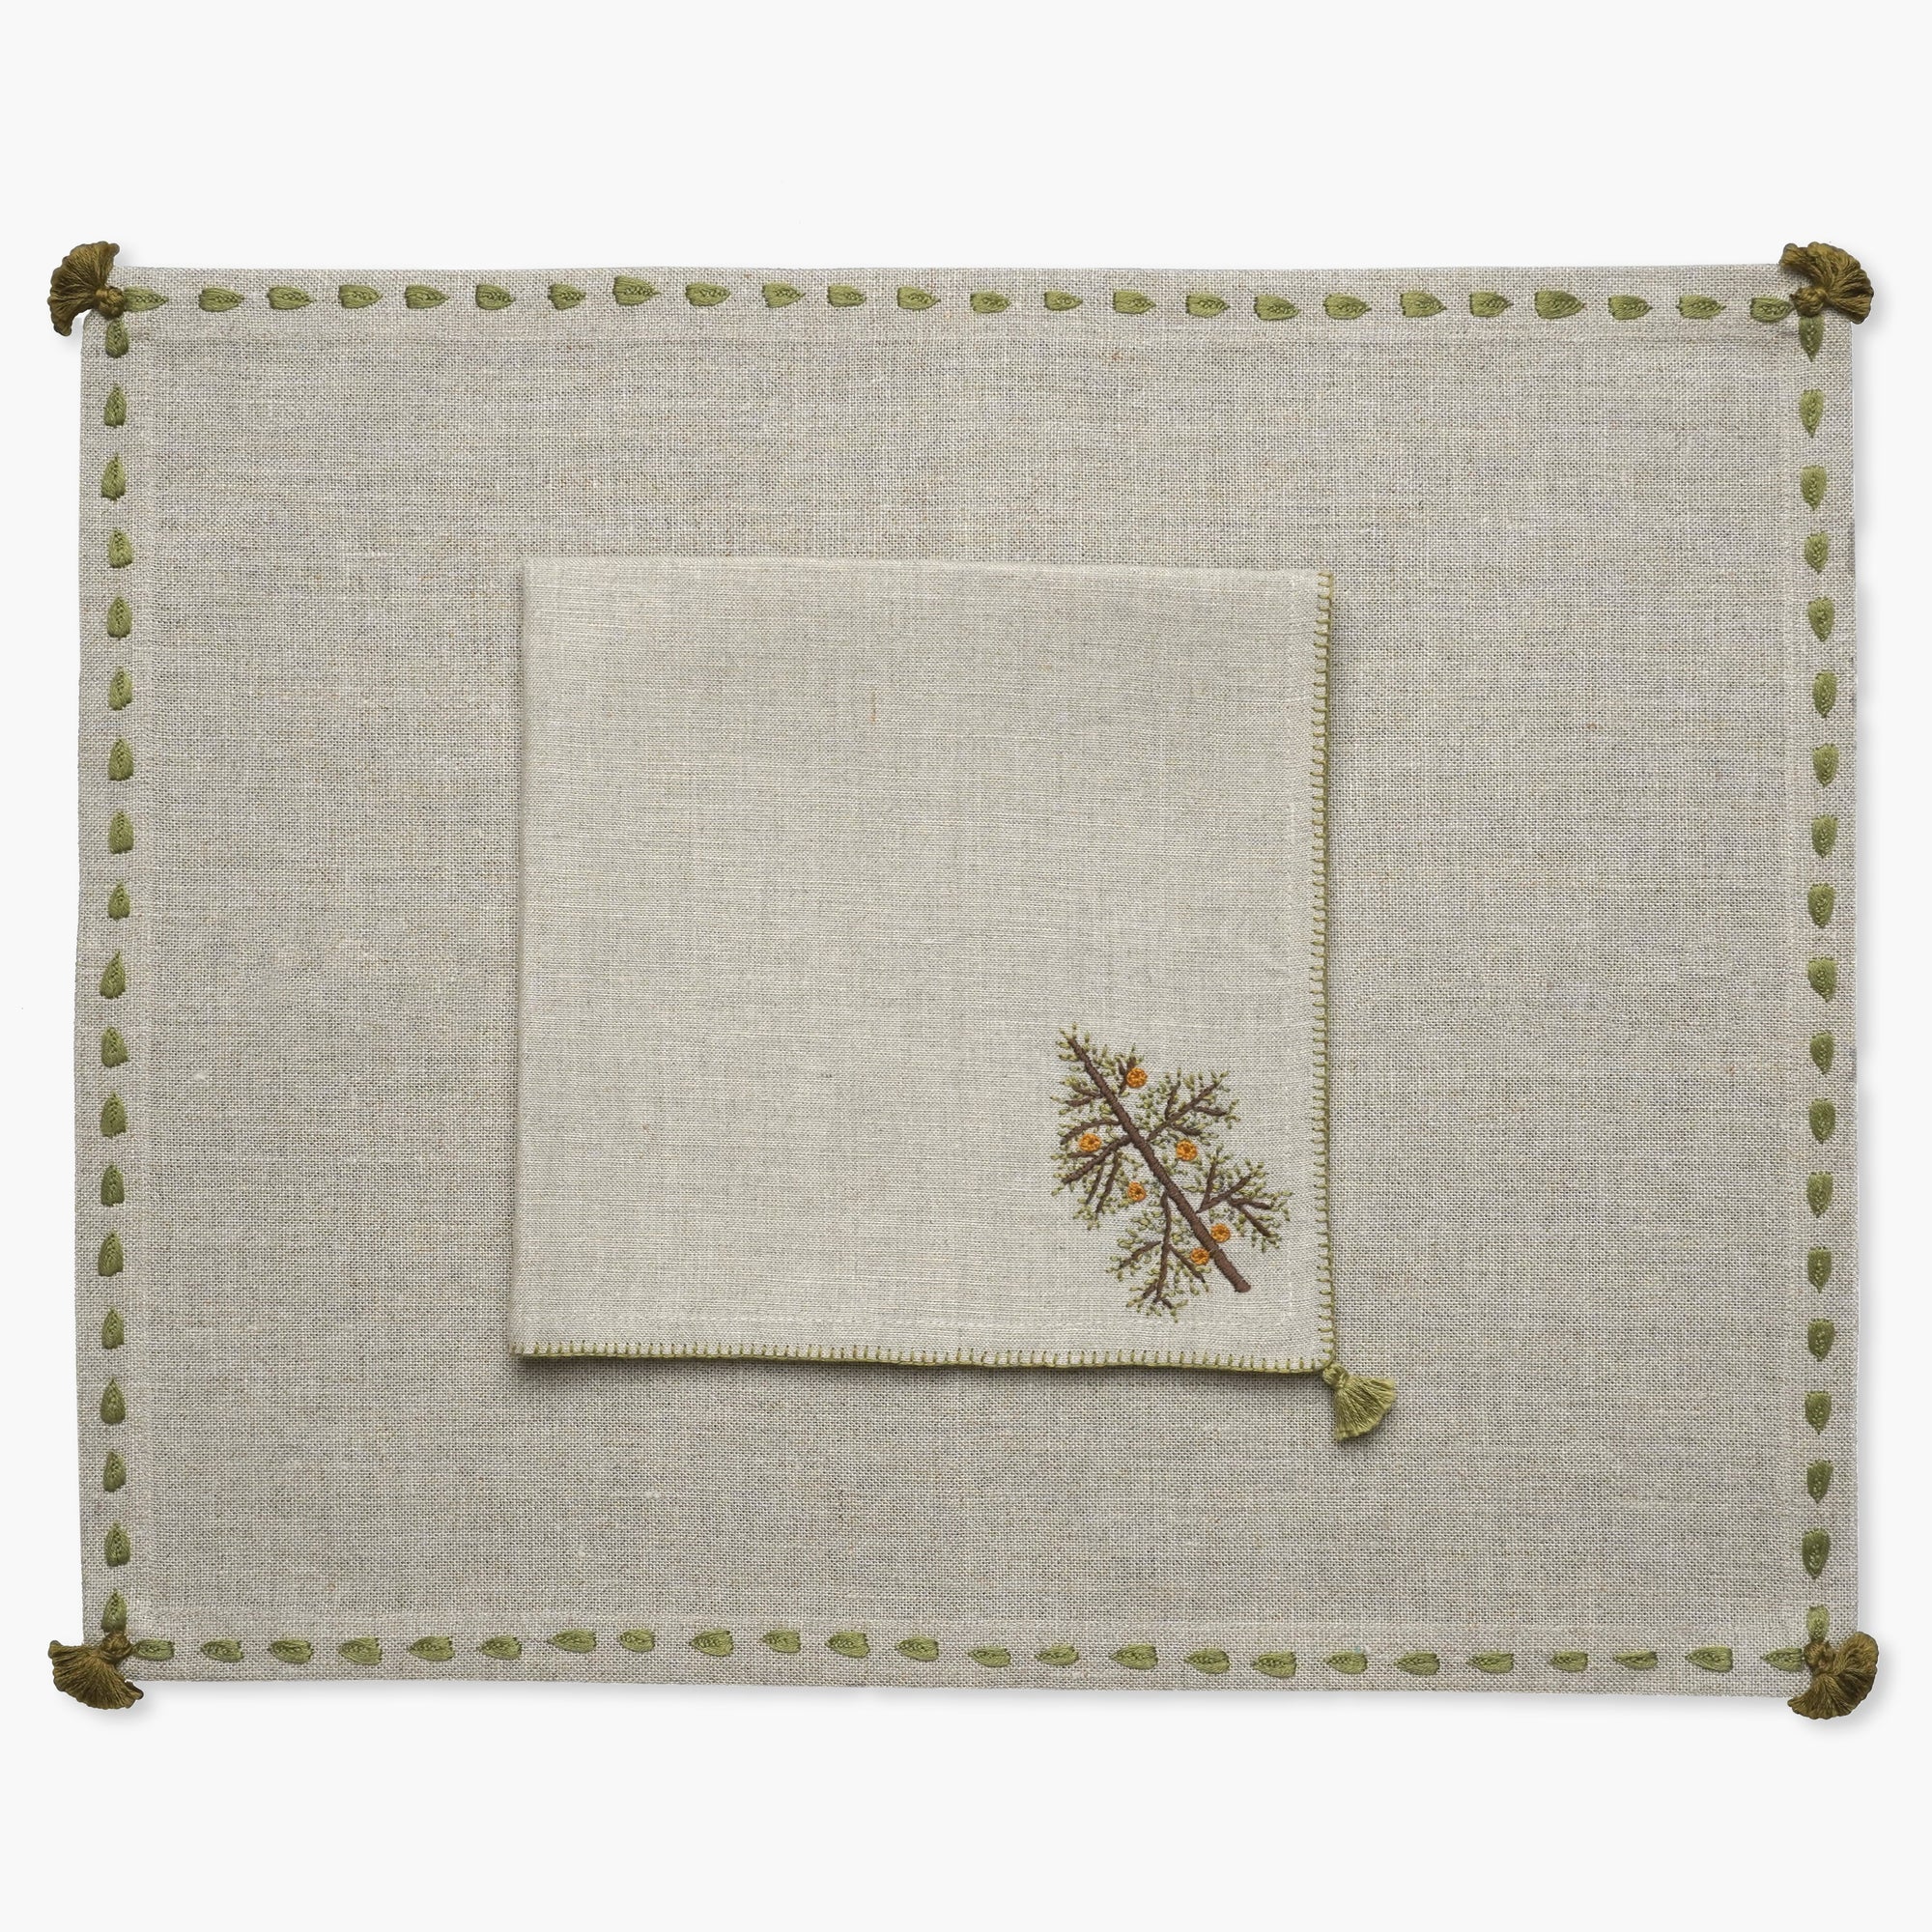 beige linen table napkin hand embroidered with Christmas tree design from artha collections